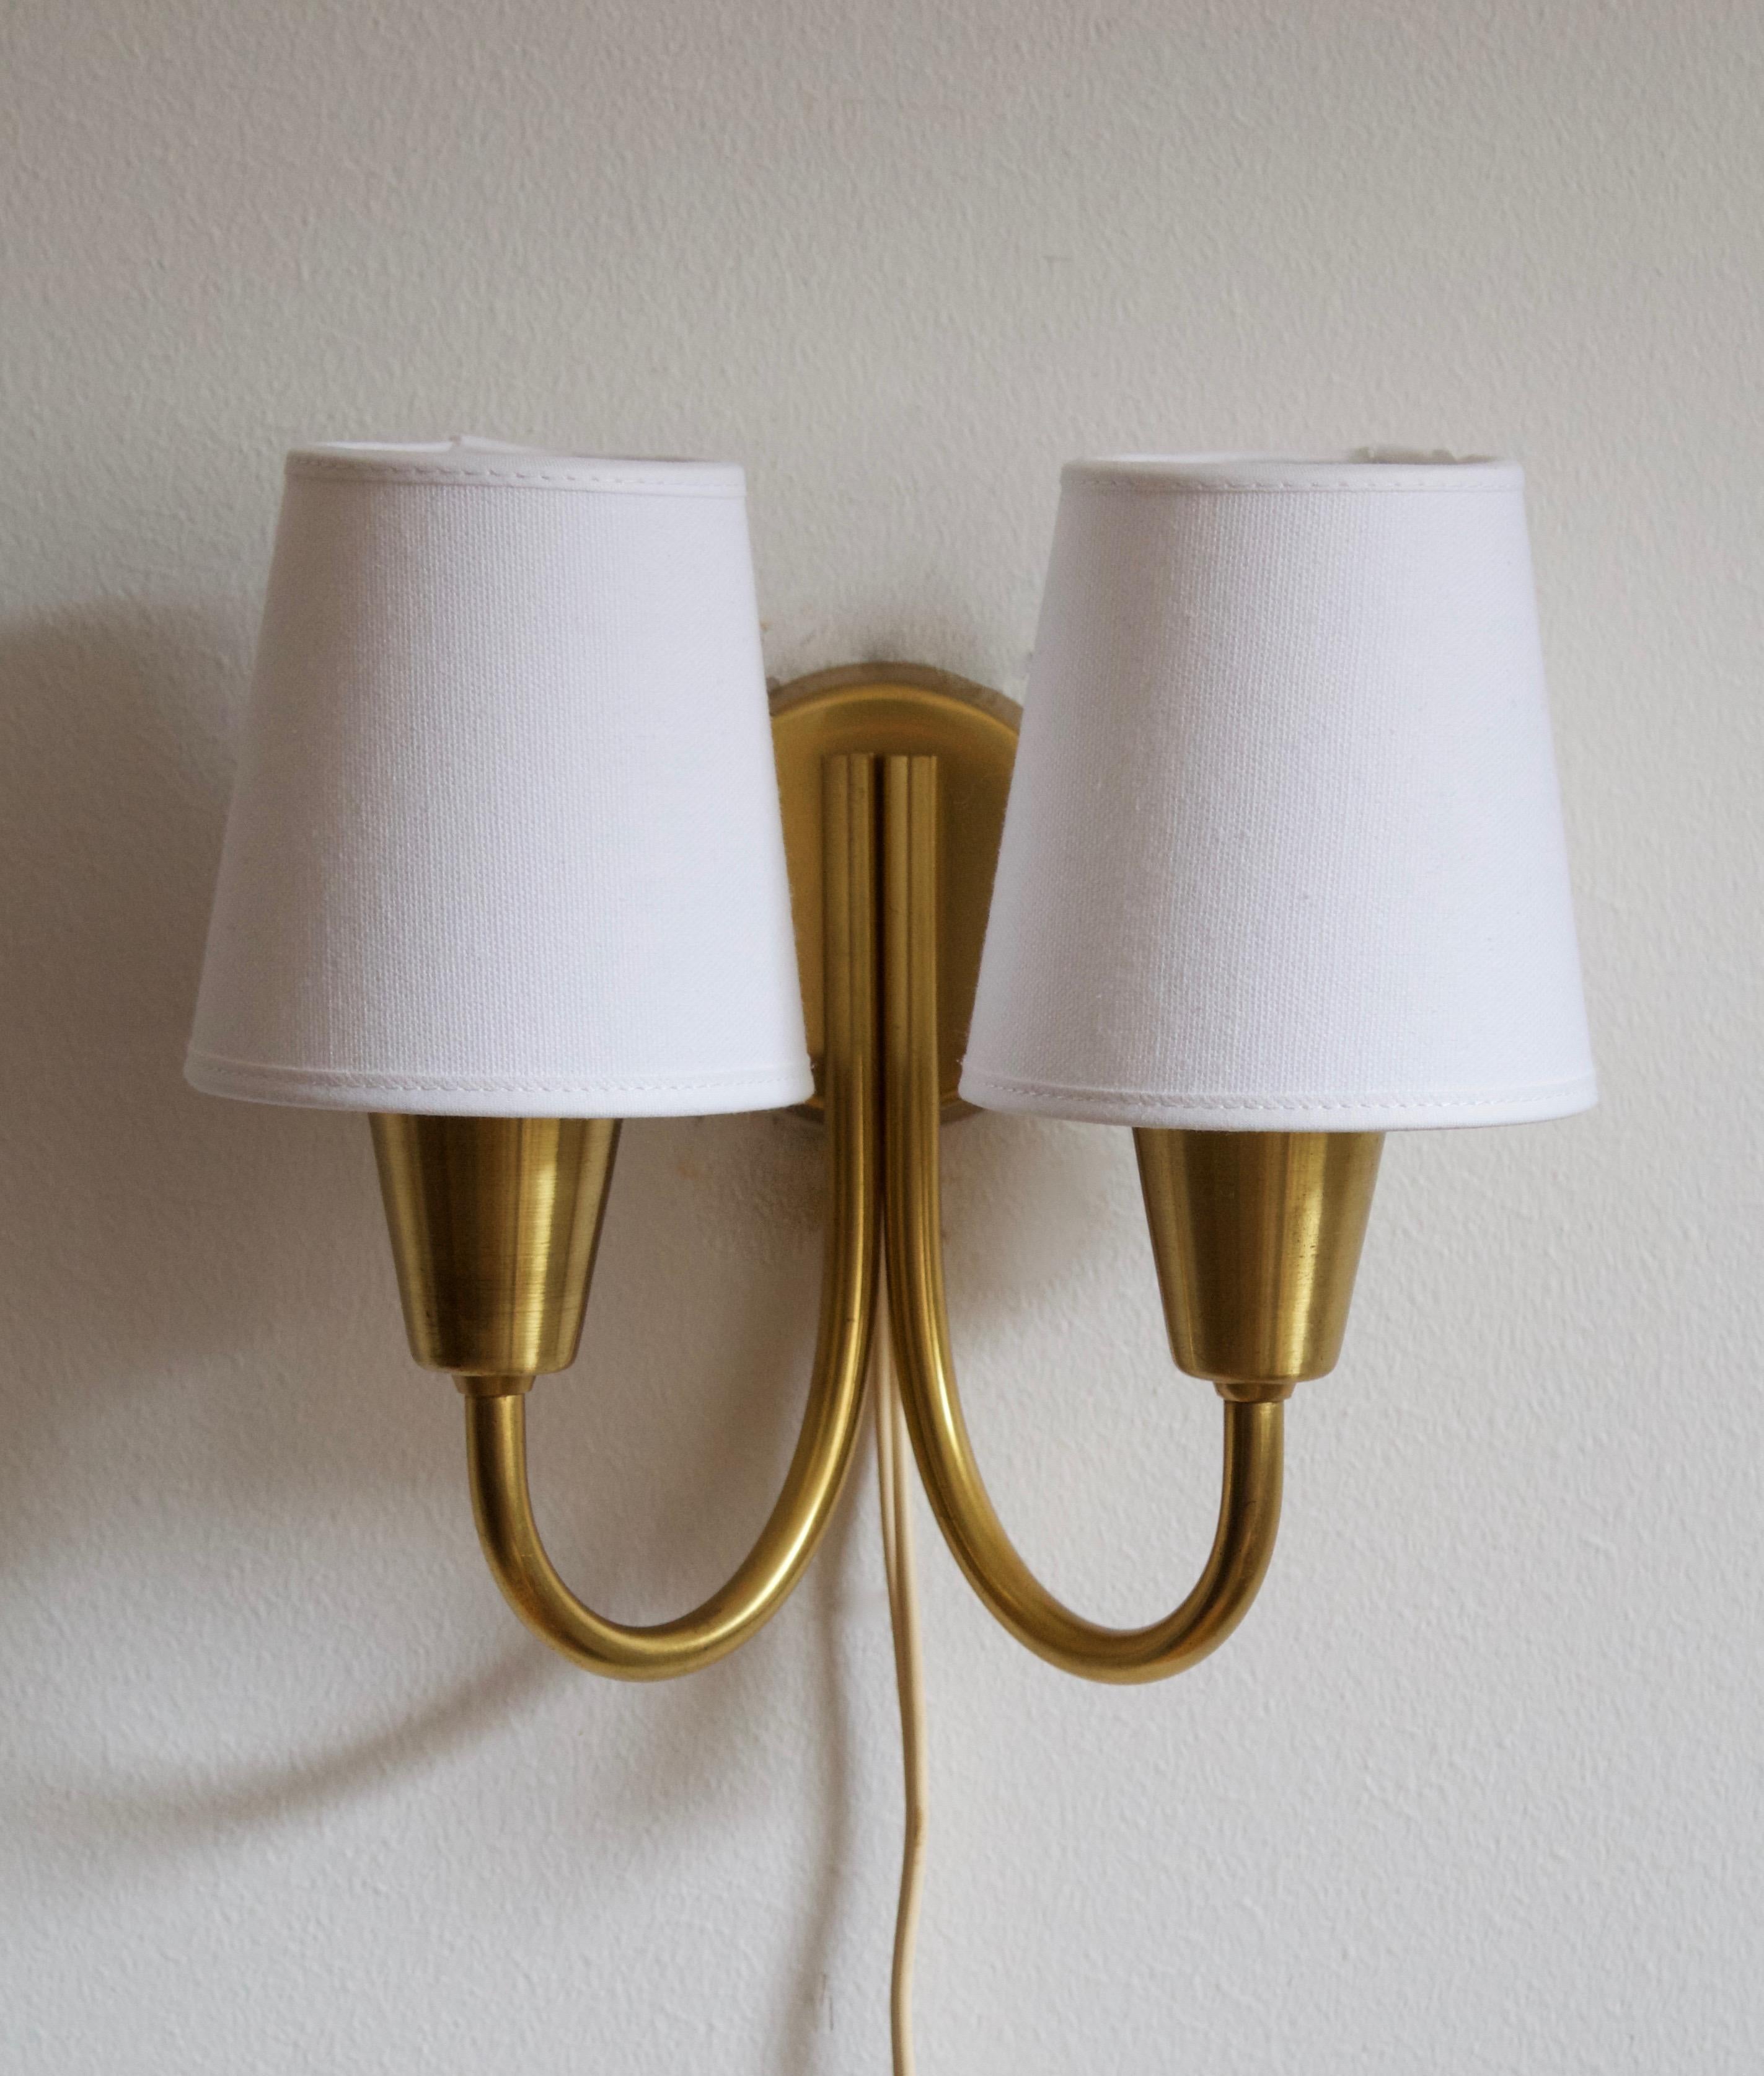 A two-armed wall sconce / wall light, designed and produced by Lyfa, Denmark, 1950s. Originally mounted with glass shades, now with brand new linen lampshades. 

Other designers of the period include Paavo Tynell, Jean Royère, Josef Frank, Kaare